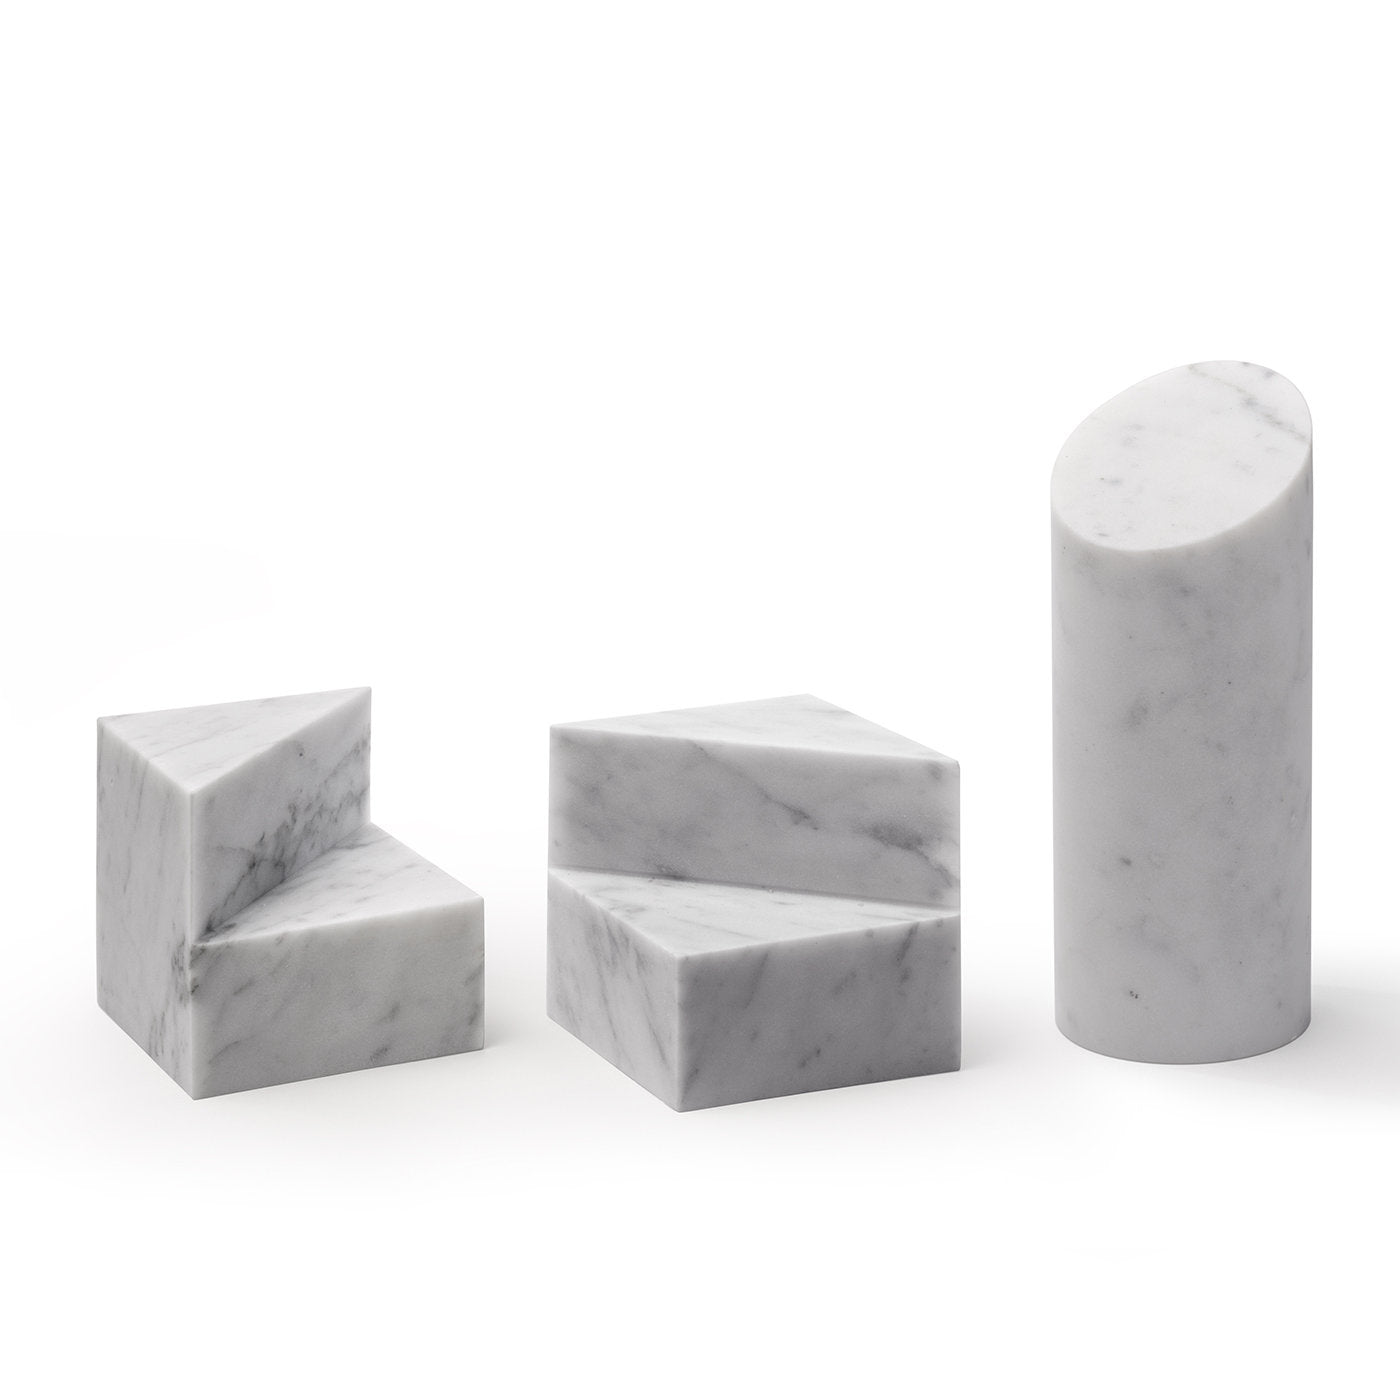 Kilos White Cylinder Bookend by Elisa Ossino - Alternative view 1